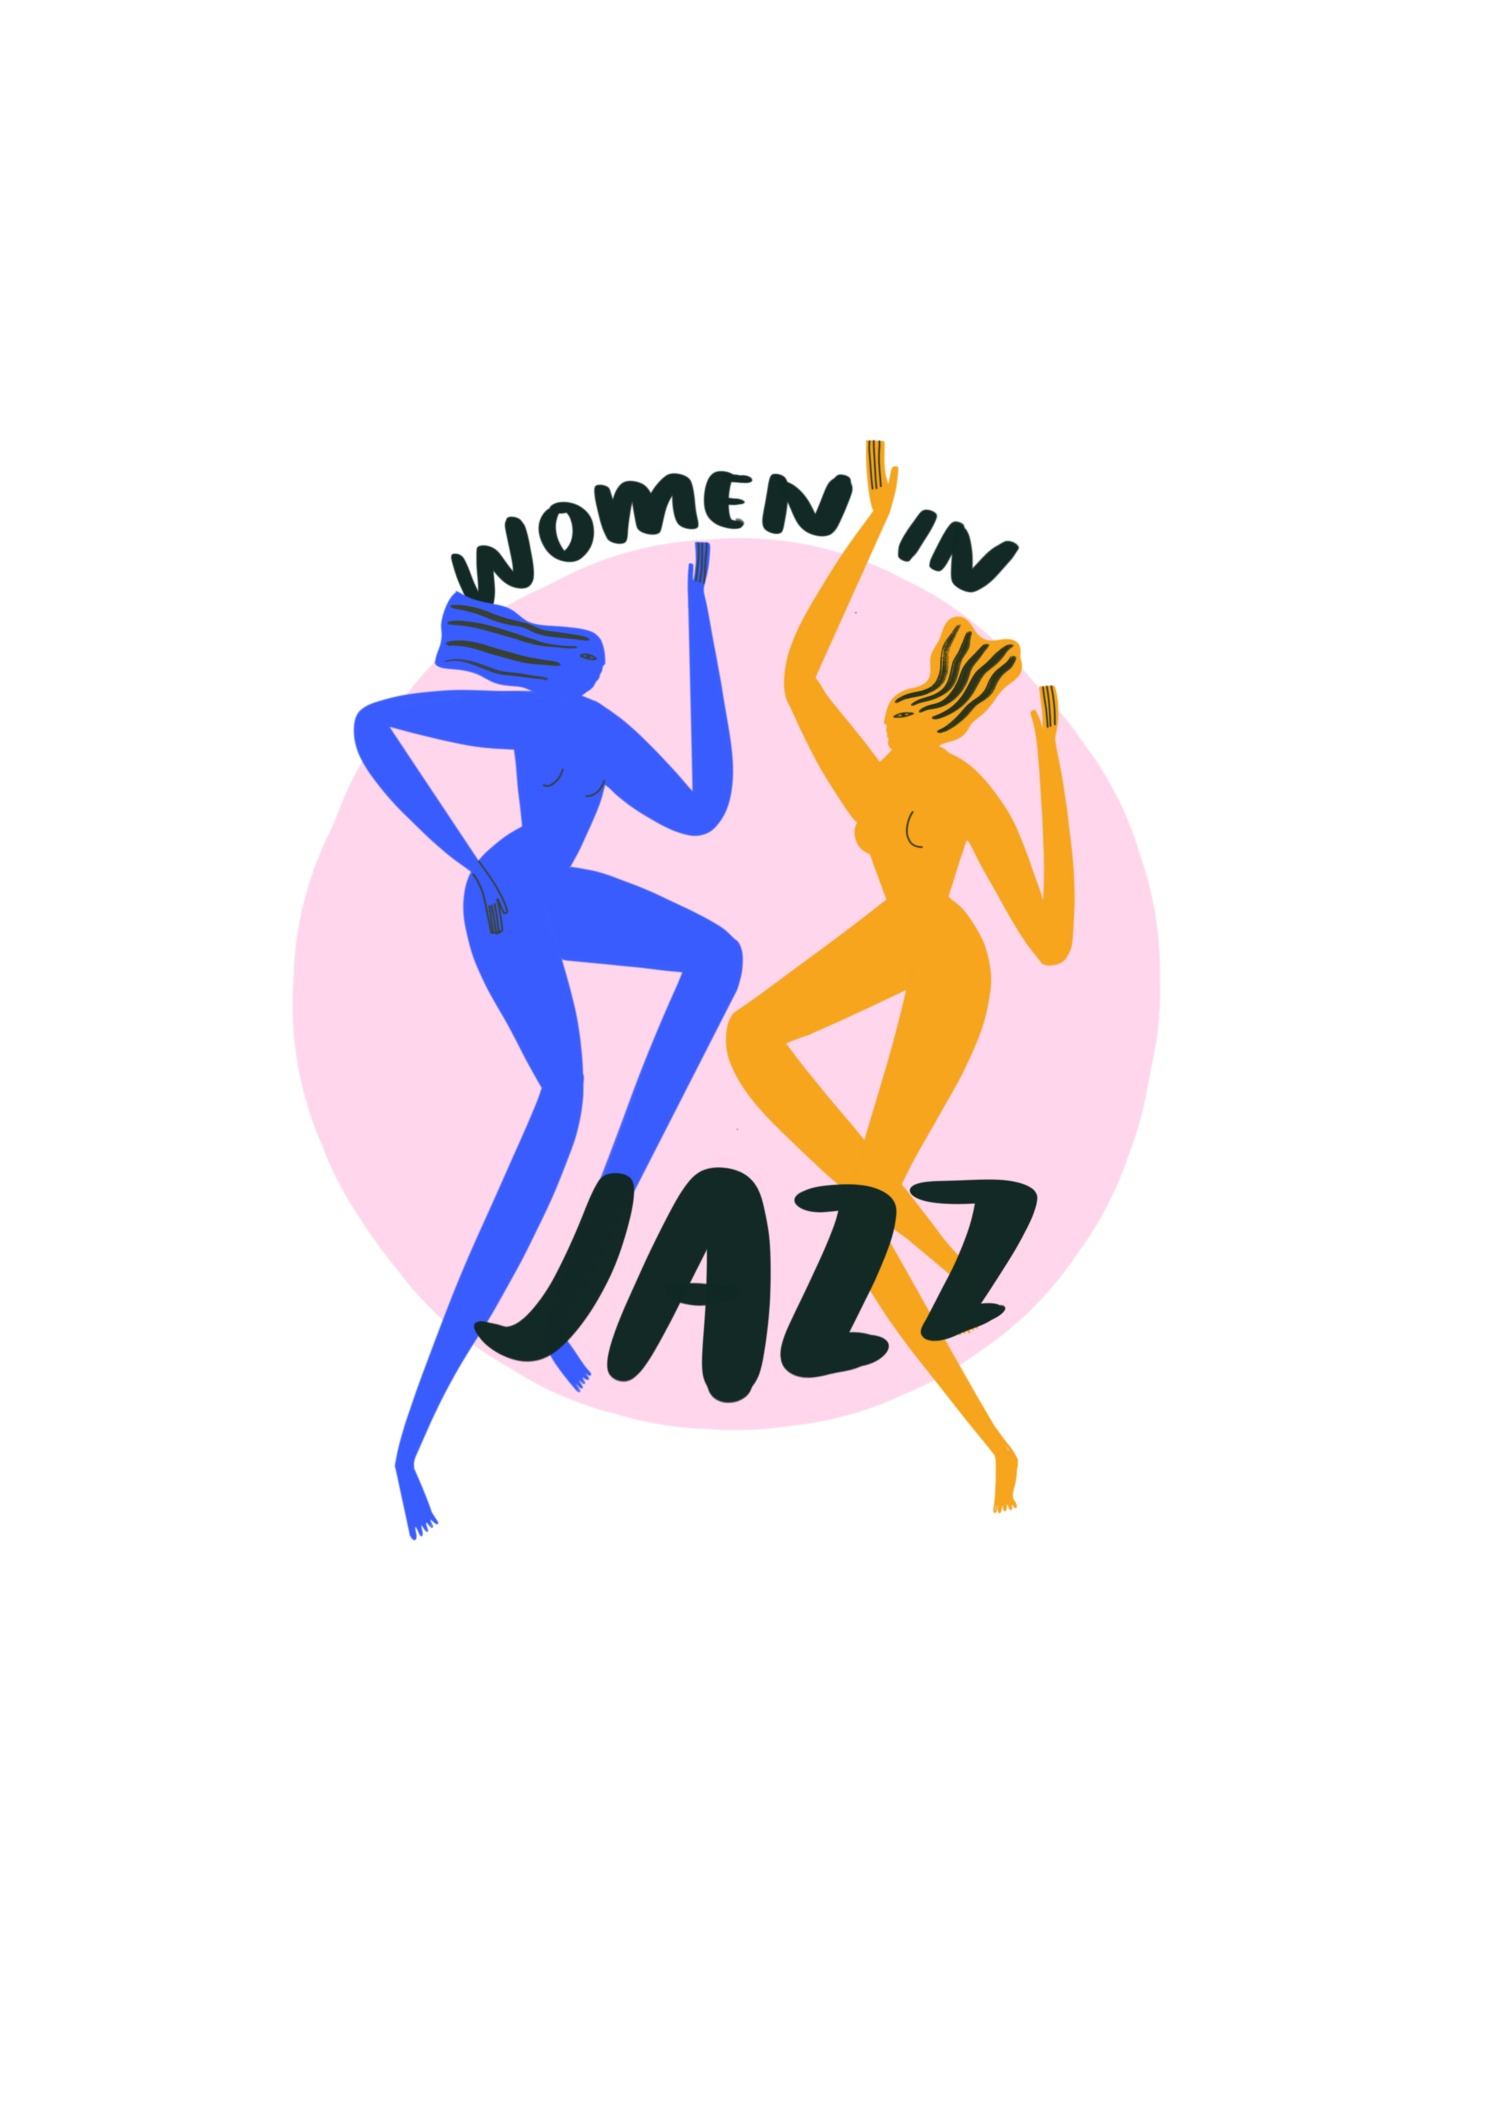 Celebrating women from different backgrounds and Jazz genres